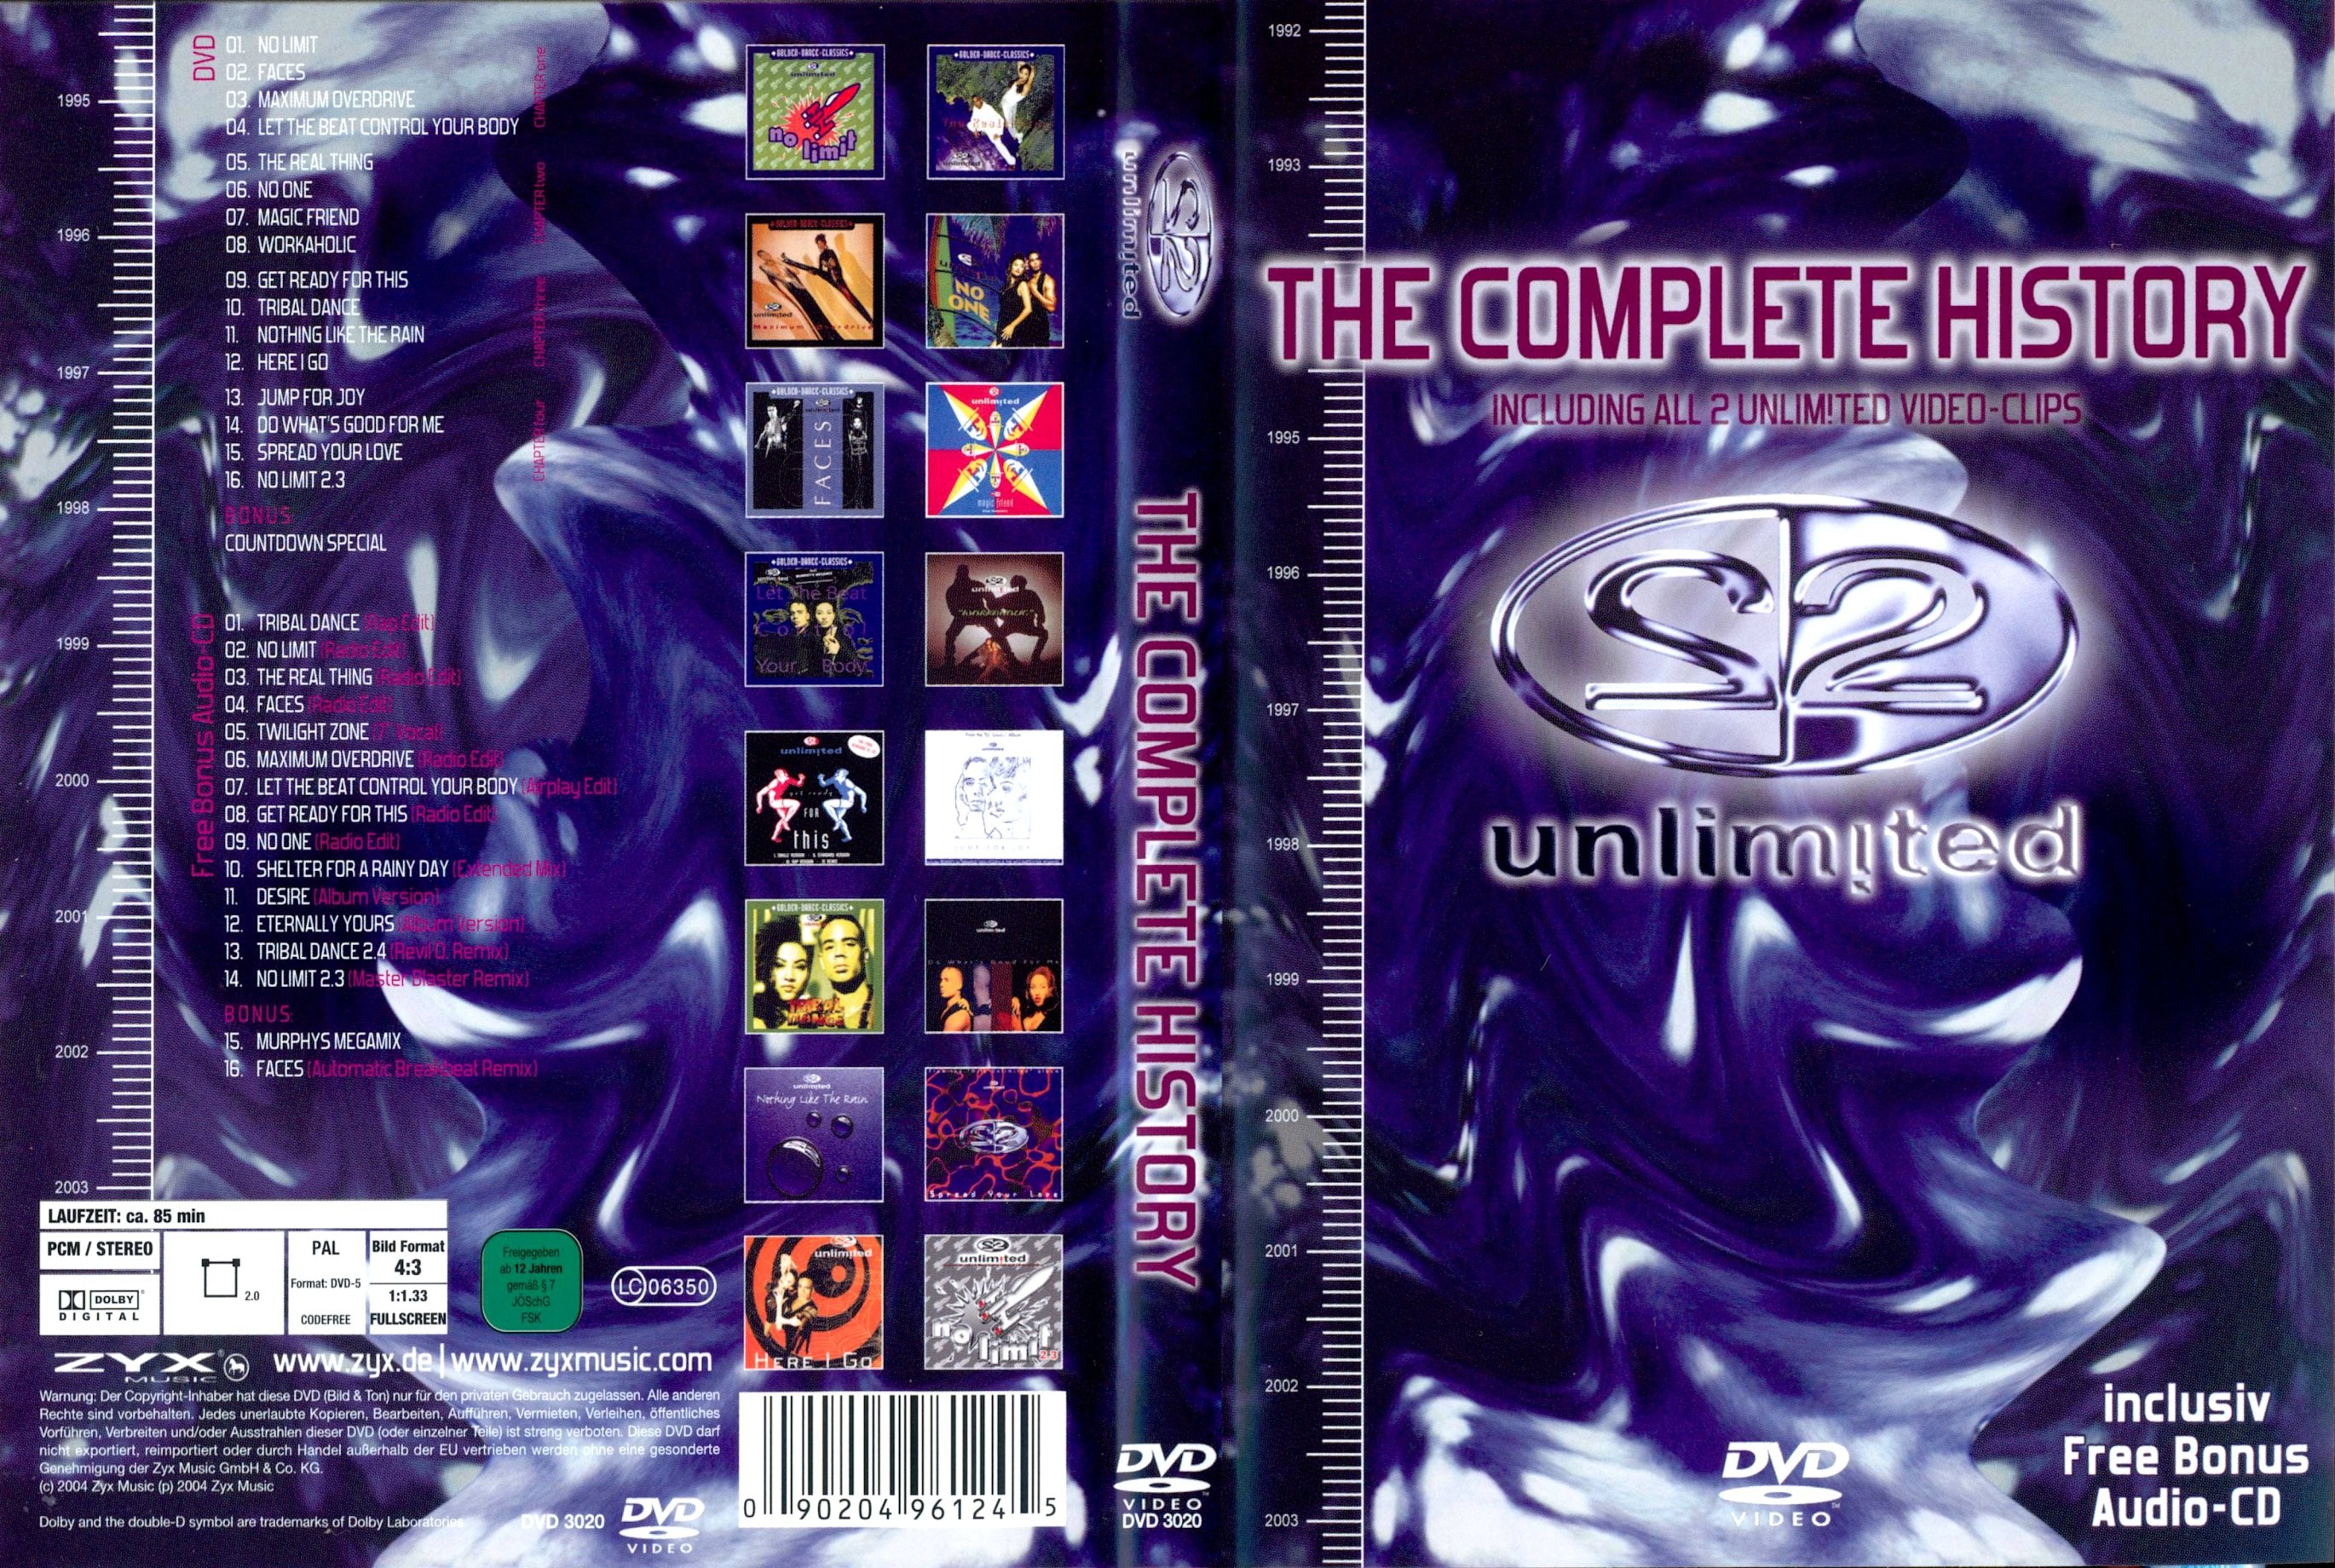 Jaquette DVD 2 unlimited - The complete history